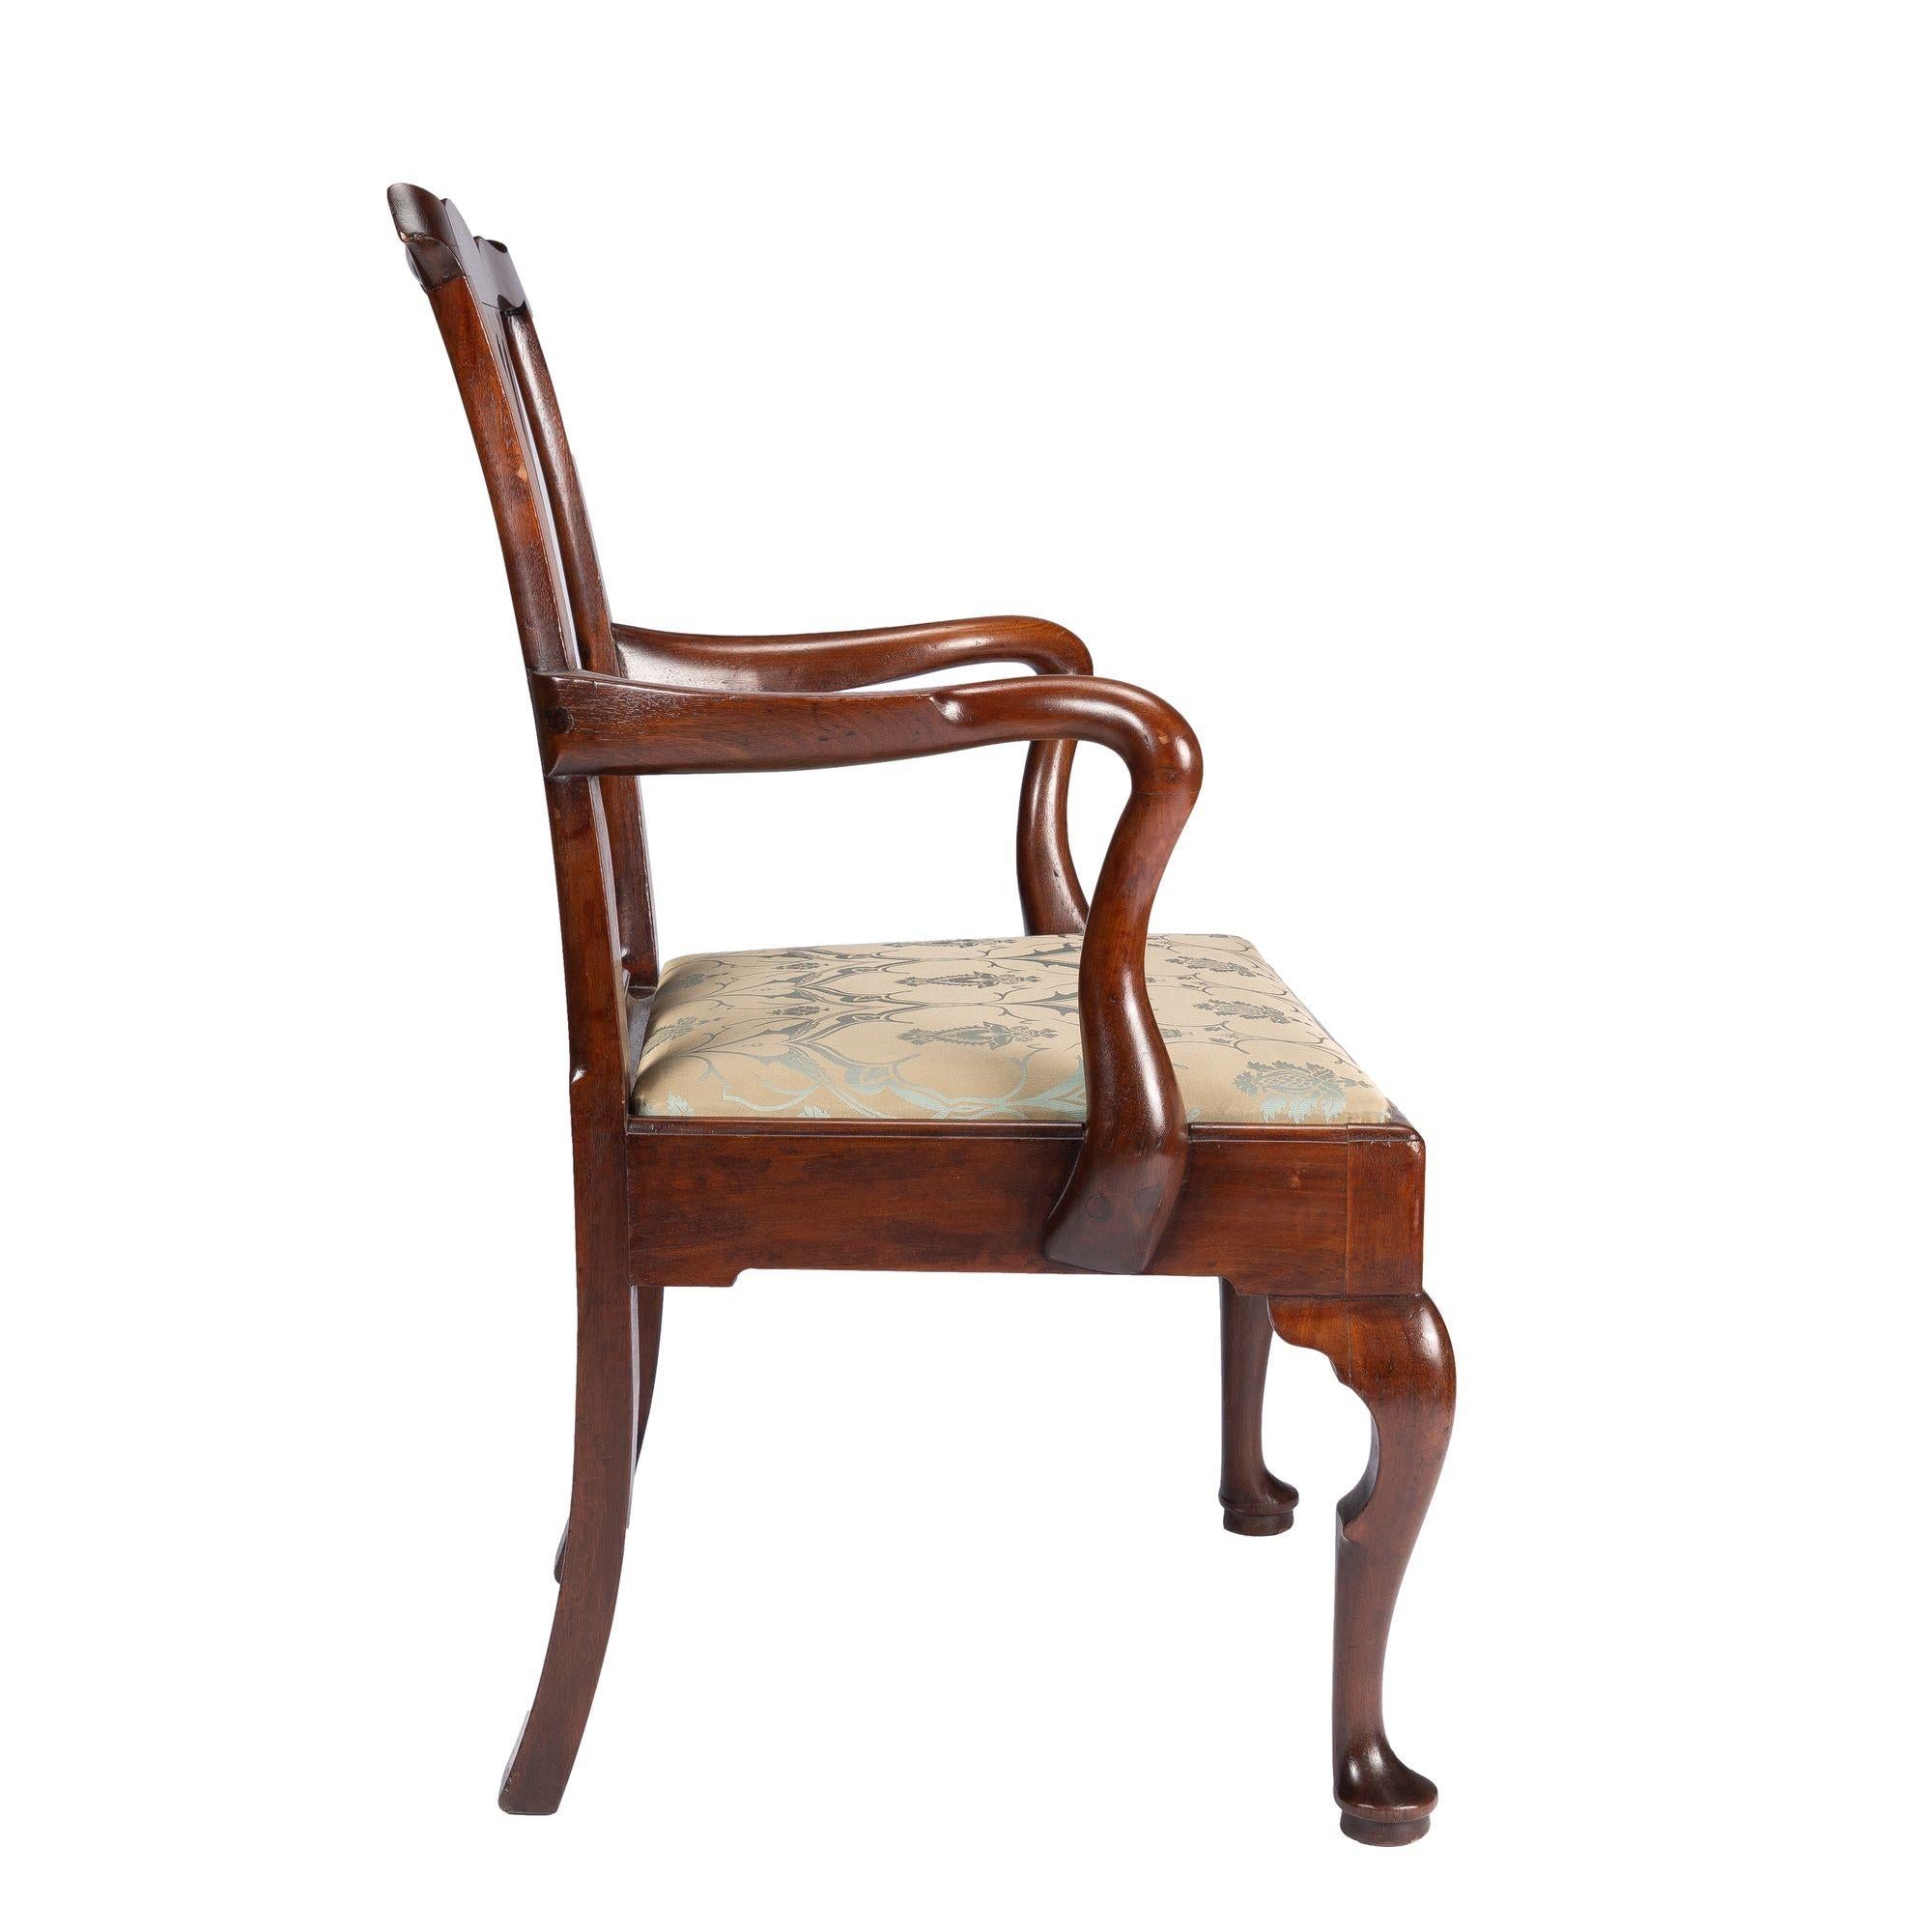 English George II Walnut Armchair with Upholstered Slip Seat, c. 1740 For Sale 2